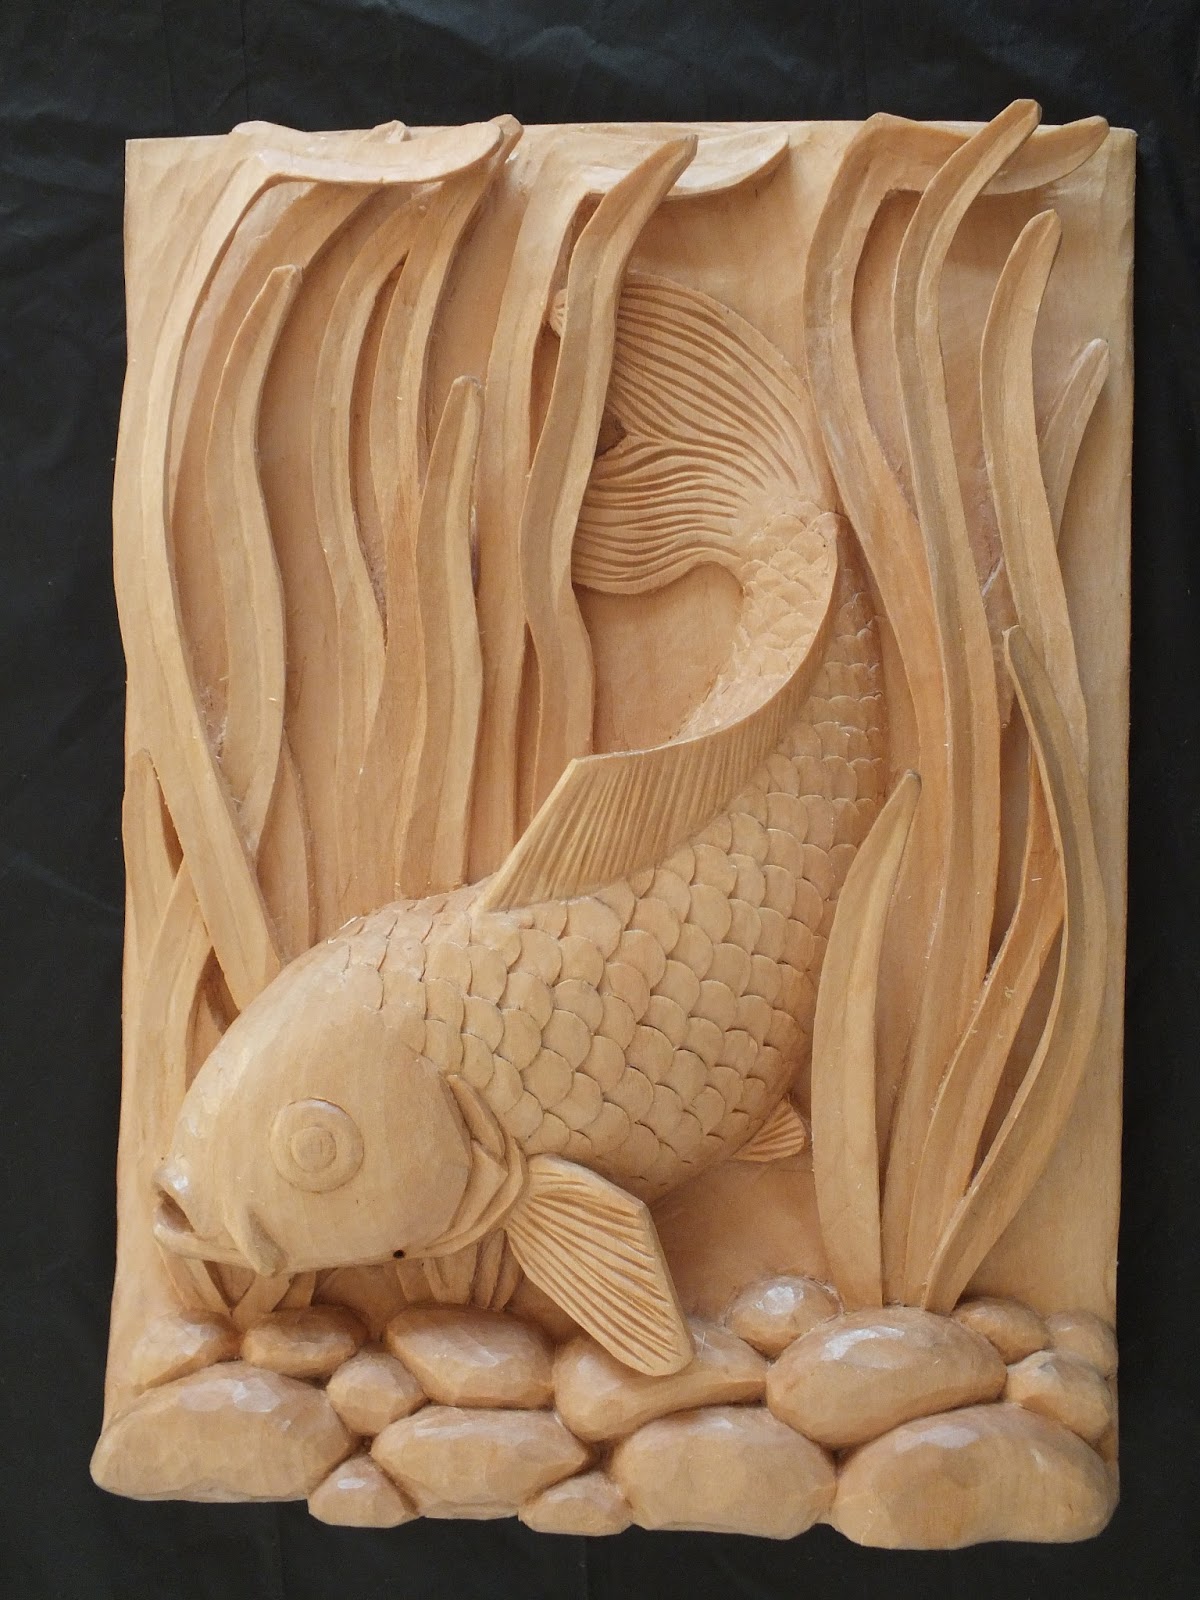 Duanes Carvings: Carp swimming through the reeds